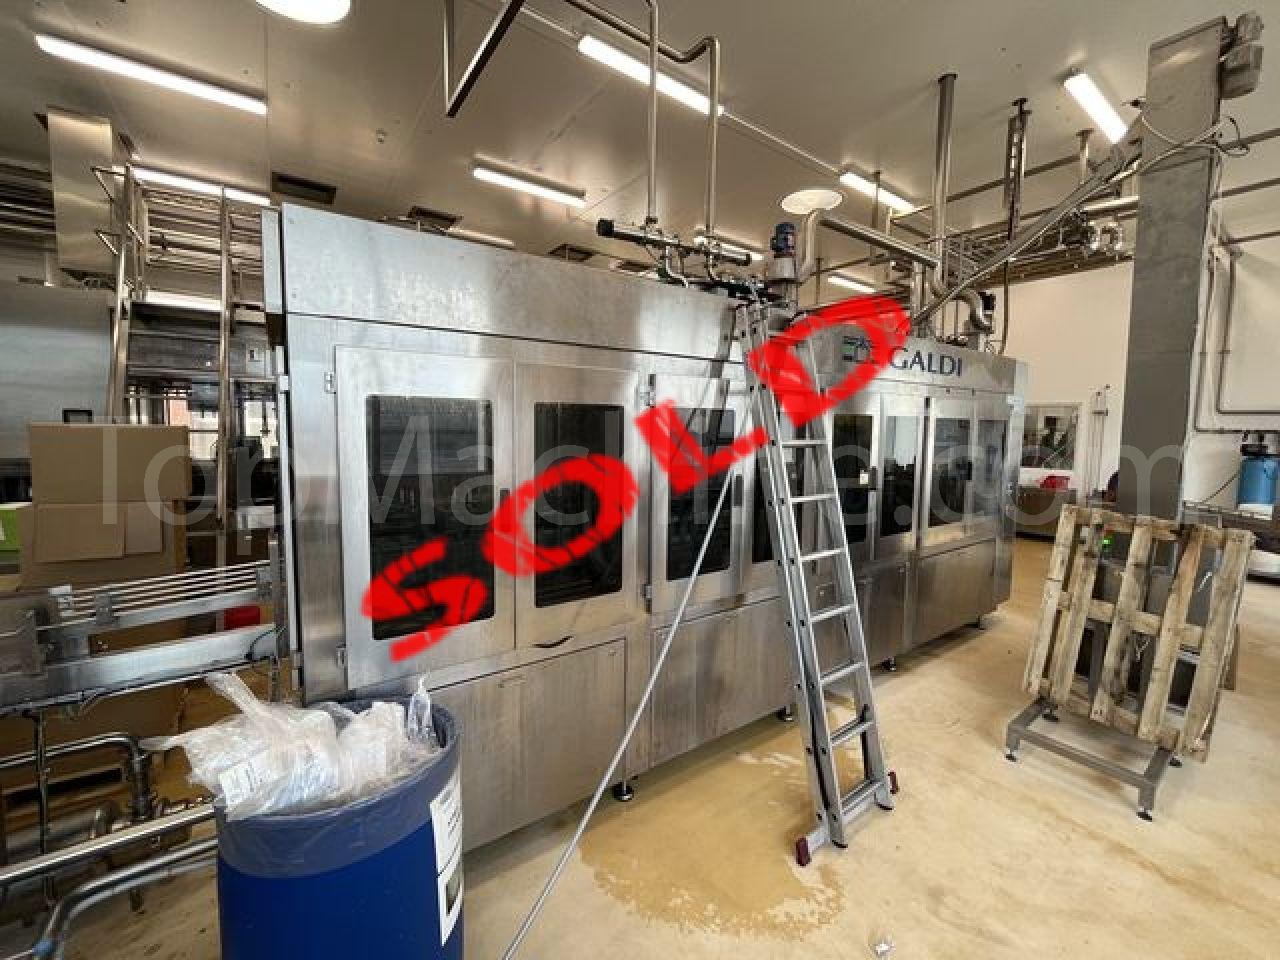 Used Galdi RG260 A-Class Dairy & Juices Carton filling